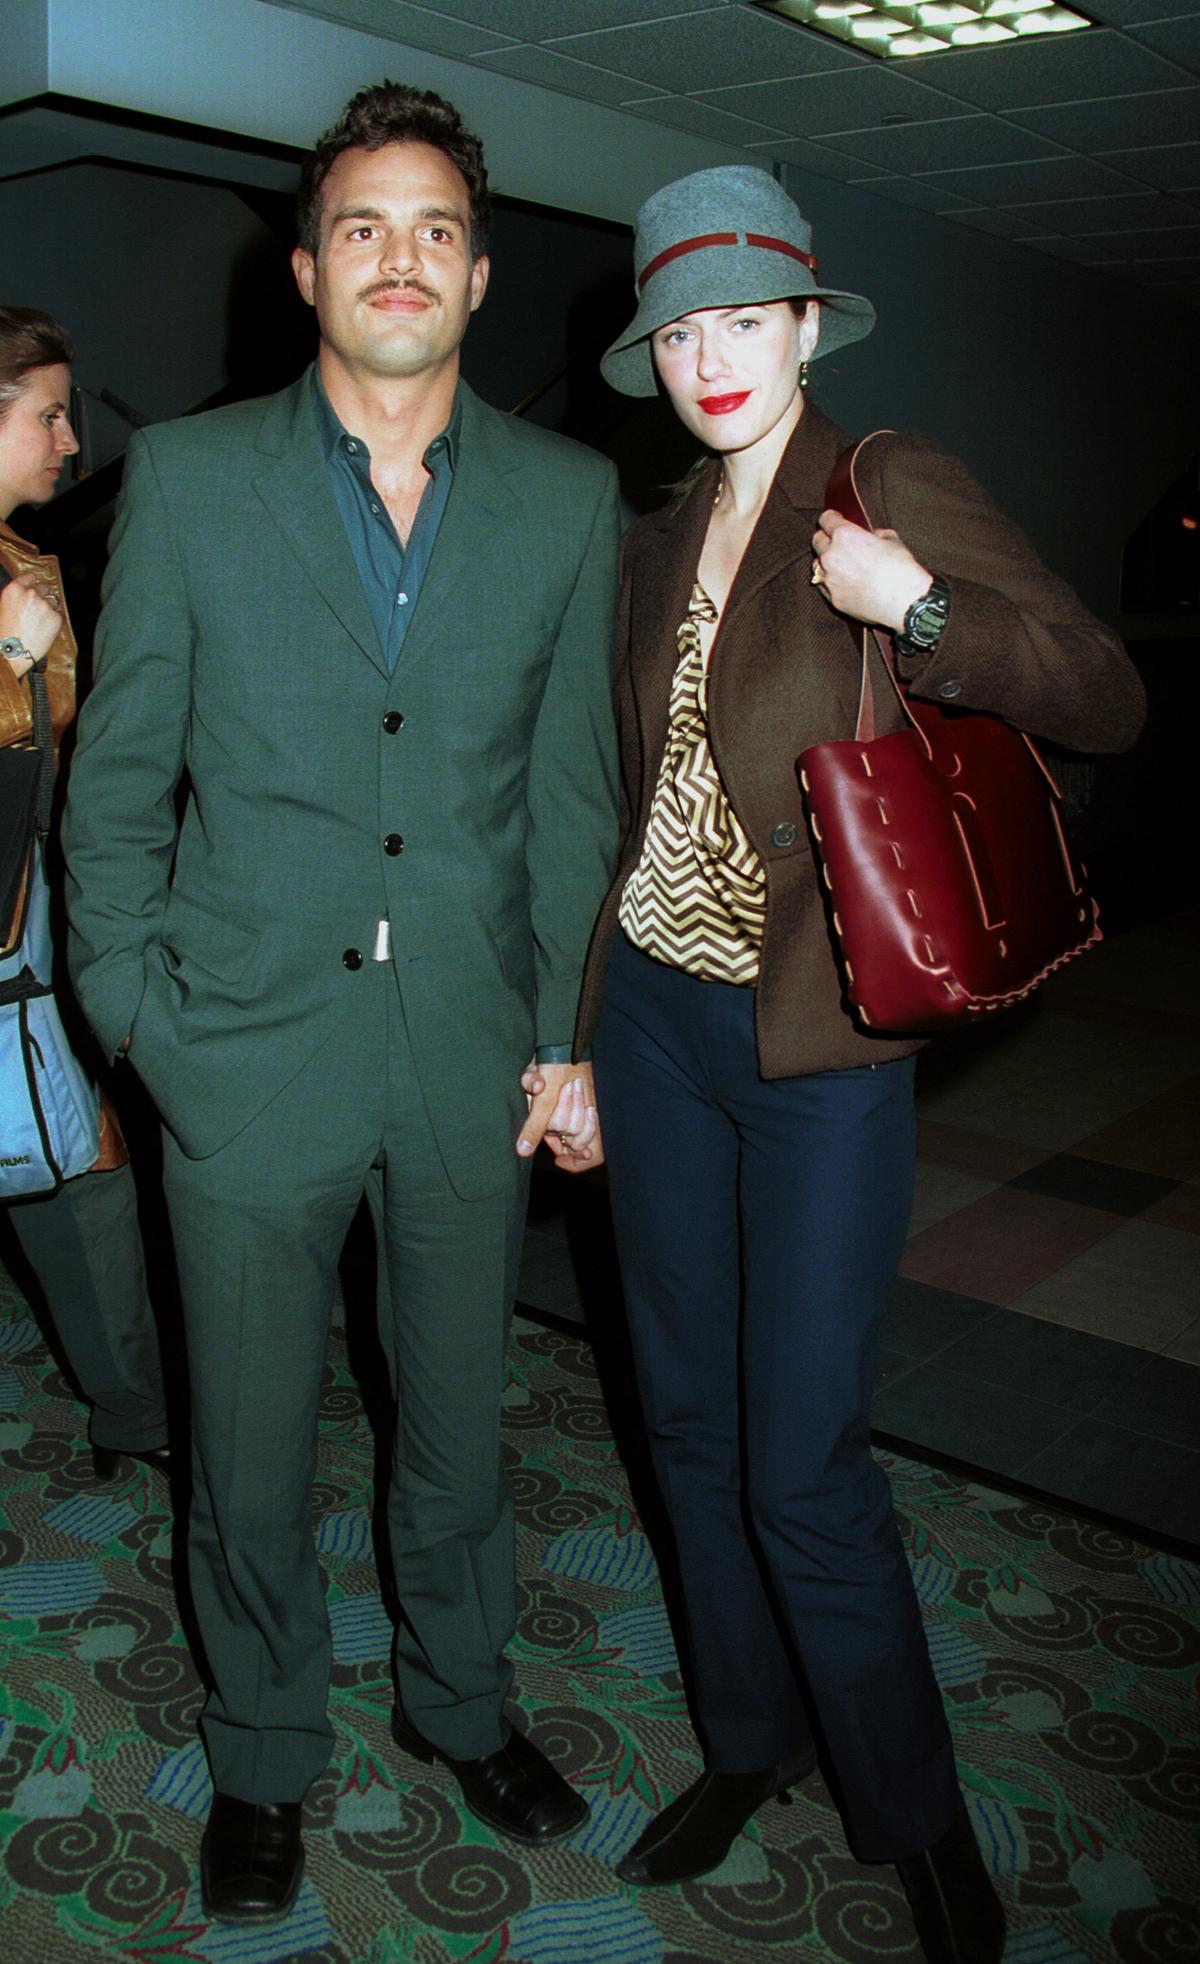 Ruffalo and Coigney attend the premiere of "You Can Count On Me" at Loews Village Theatre in New York City on Nov. 6, 2000. (©Getty Images | <a href="https://www.gettyimages.com/detail/news-photo/actor-mark-ruffalo-and-his-wife-sunrise-coigney-attend-the-news-photo/1305462">George De Sota</a>)